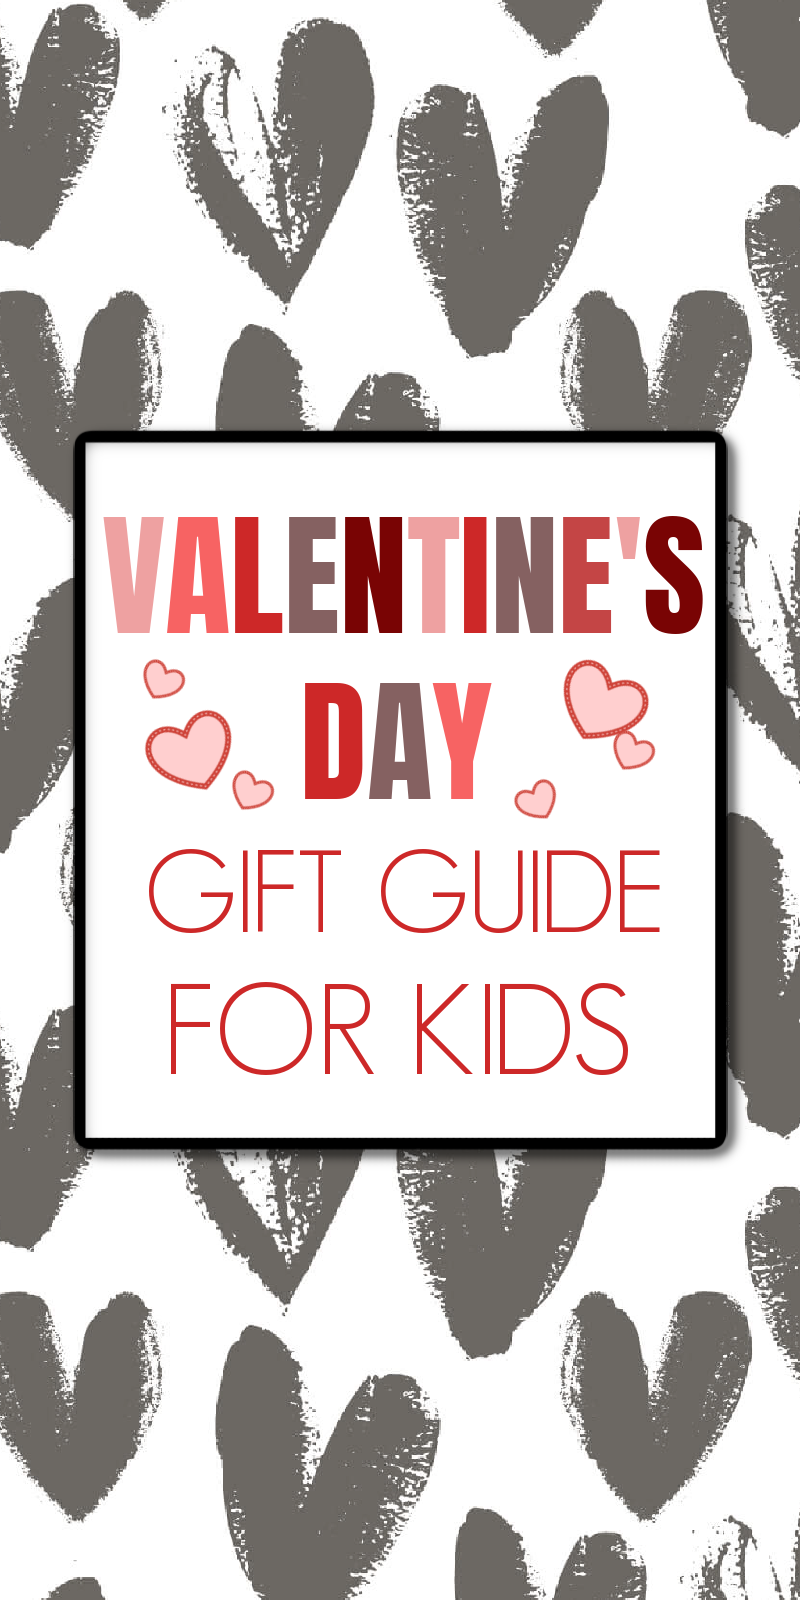 Valentine's Day gift guide for kids